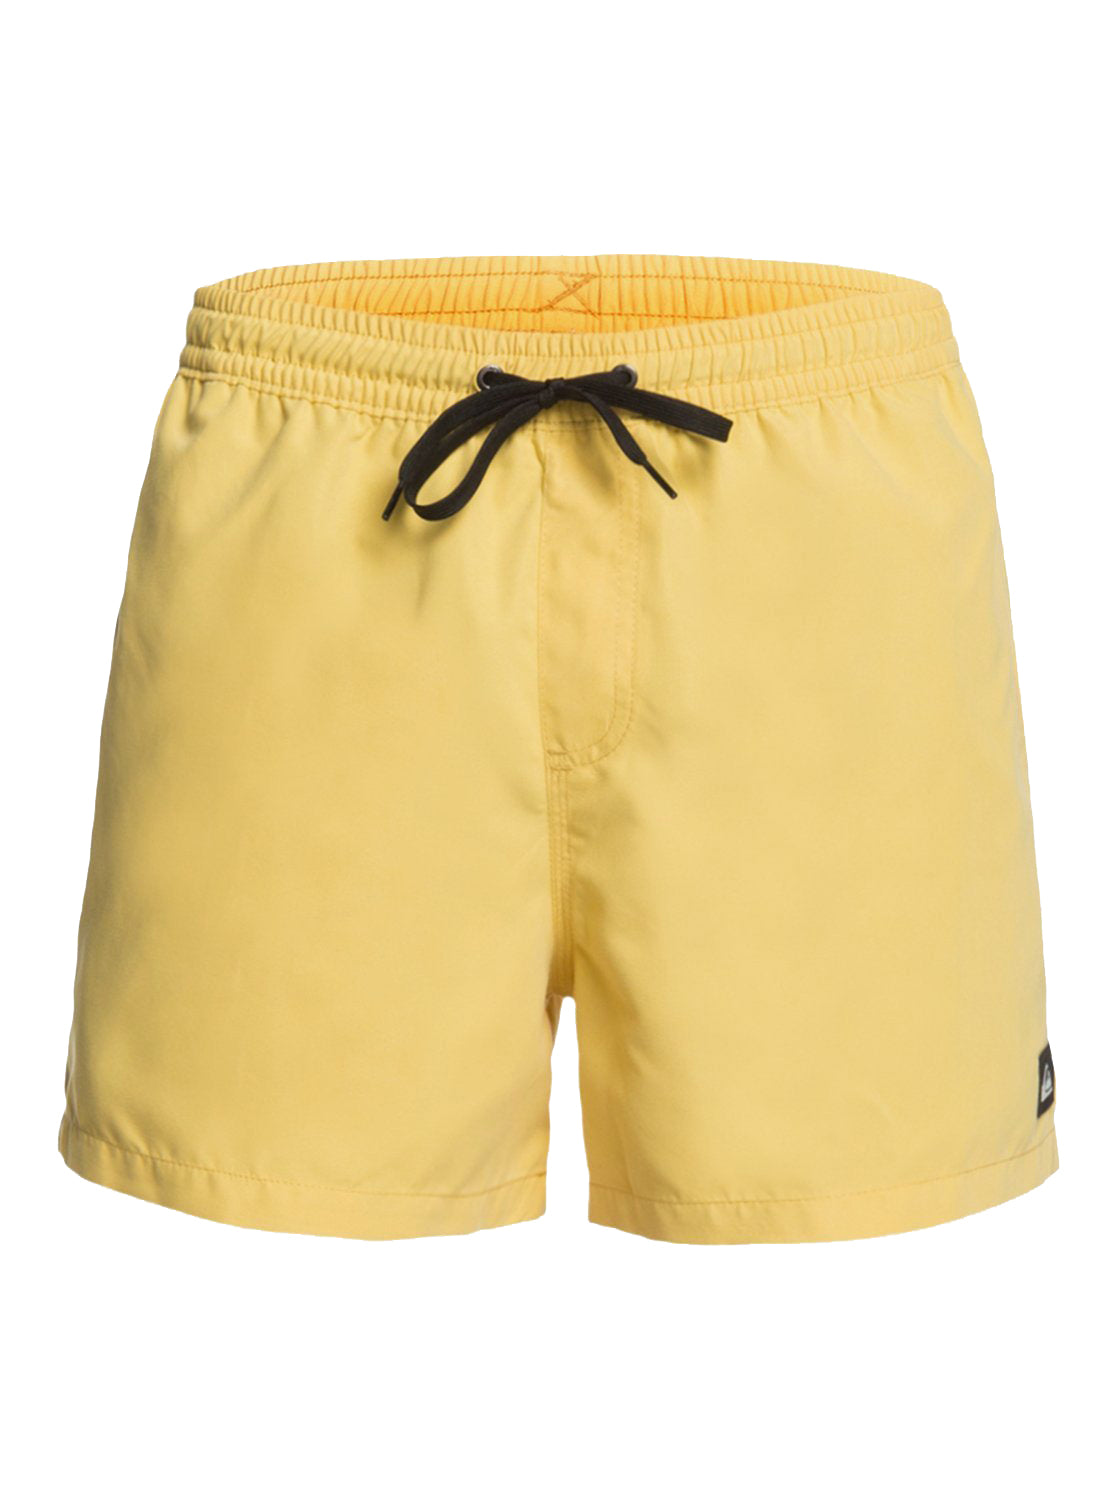 Quiksilver Everyday 15" Volleyshort YHL0 L